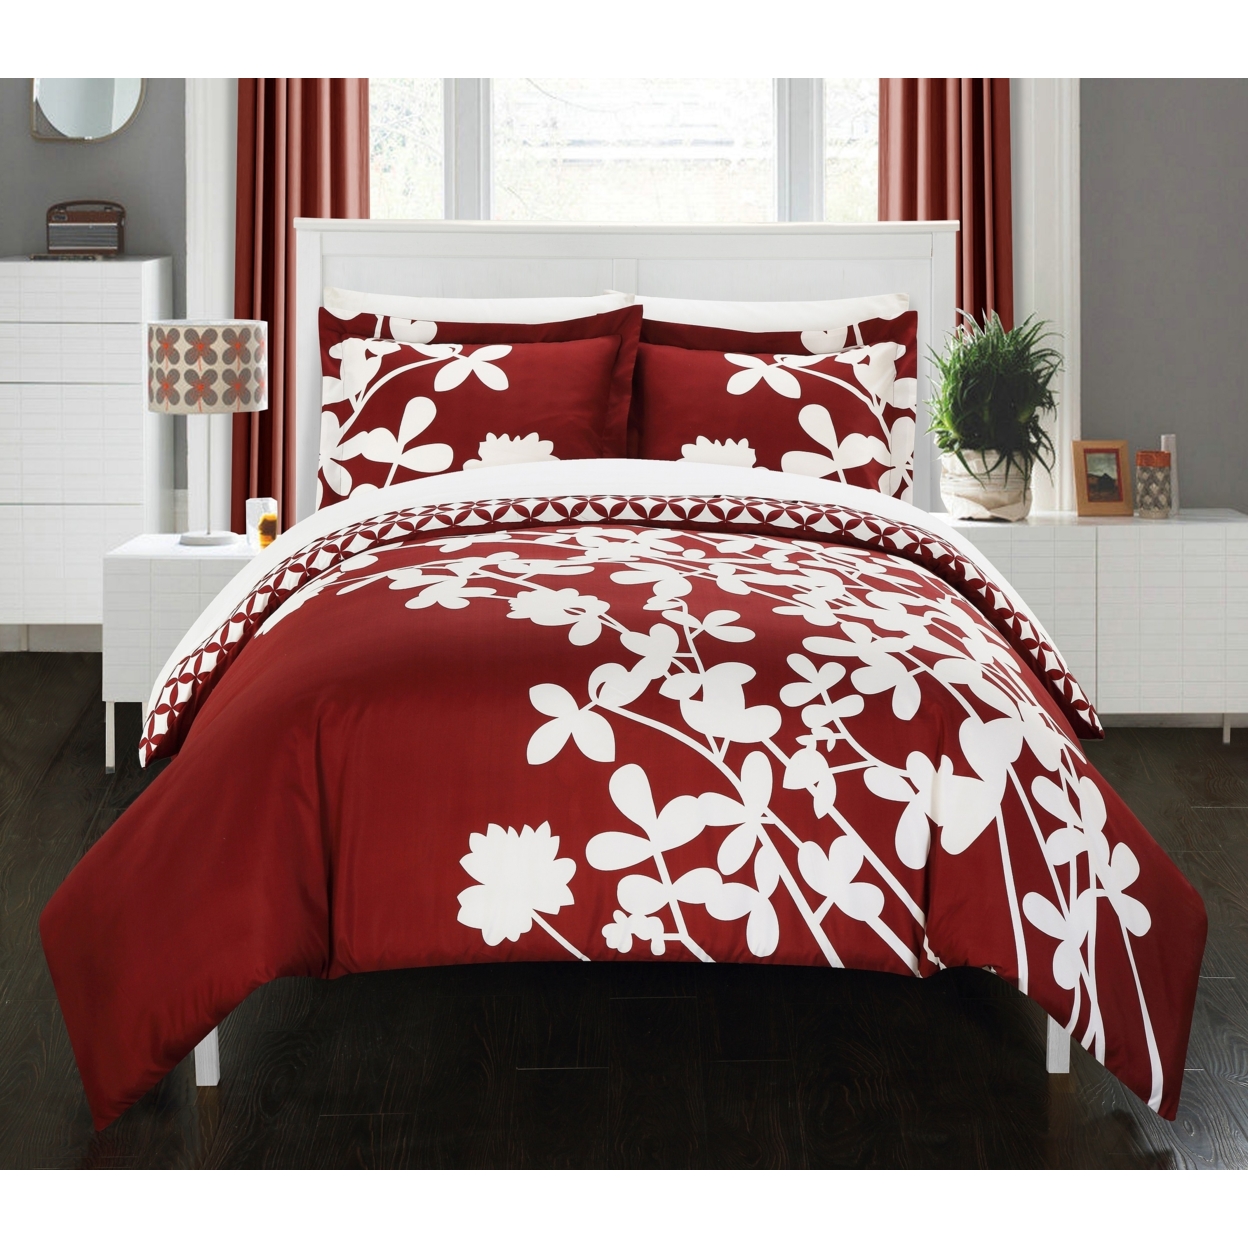 3 Piece Amaryllis Reversible Large Scale Floral Design Printed With Diamond Pattern Reverse Duvet Cover Set - Red, Queen